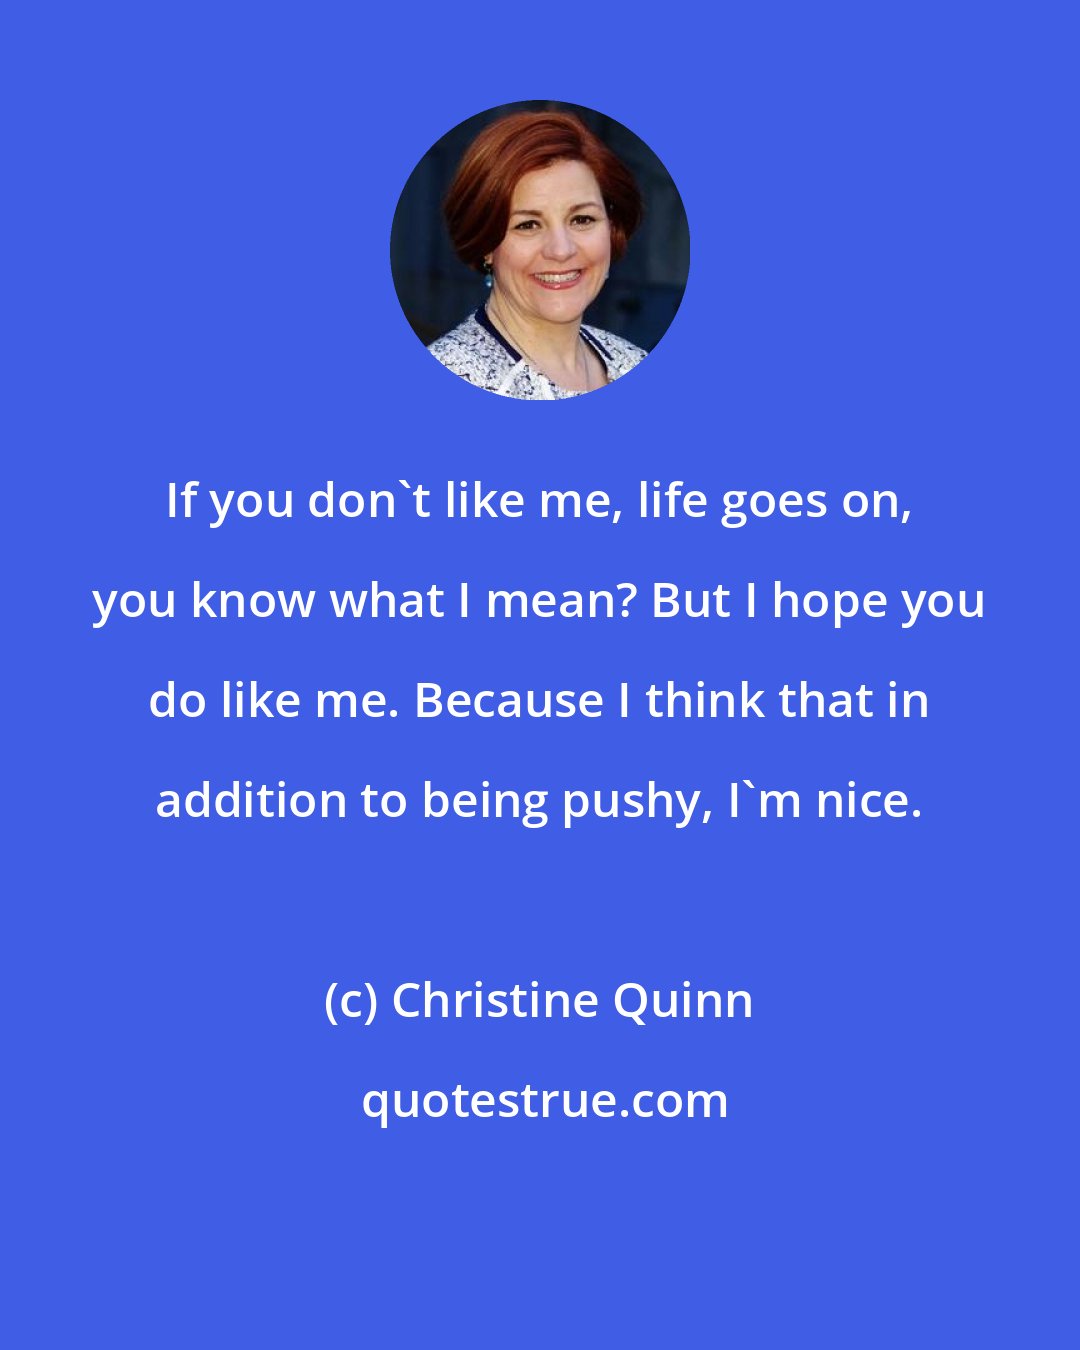 Christine Quinn: If you don't like me, life goes on, you know what I mean? But I hope you do like me. Because I think that in addition to being pushy, I'm nice.